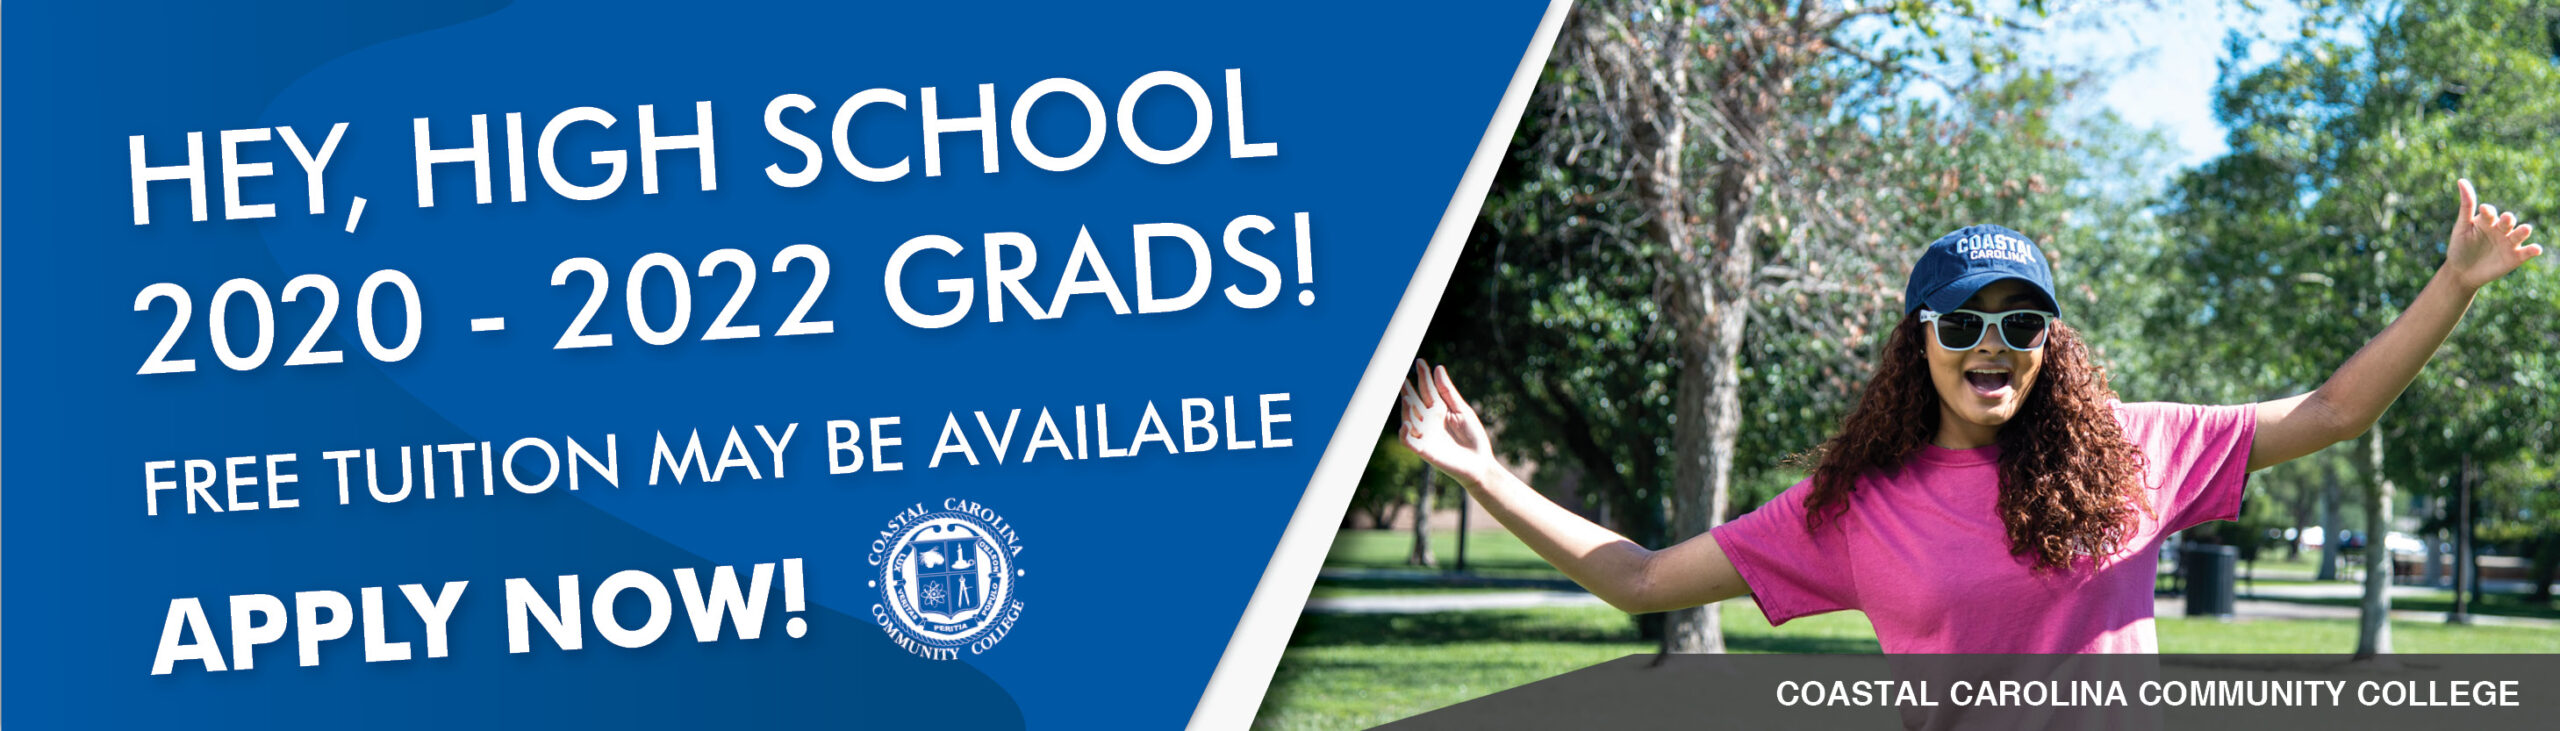 Hey, High School 2020-2022 Grads! Free tuition may be available. Apply now!